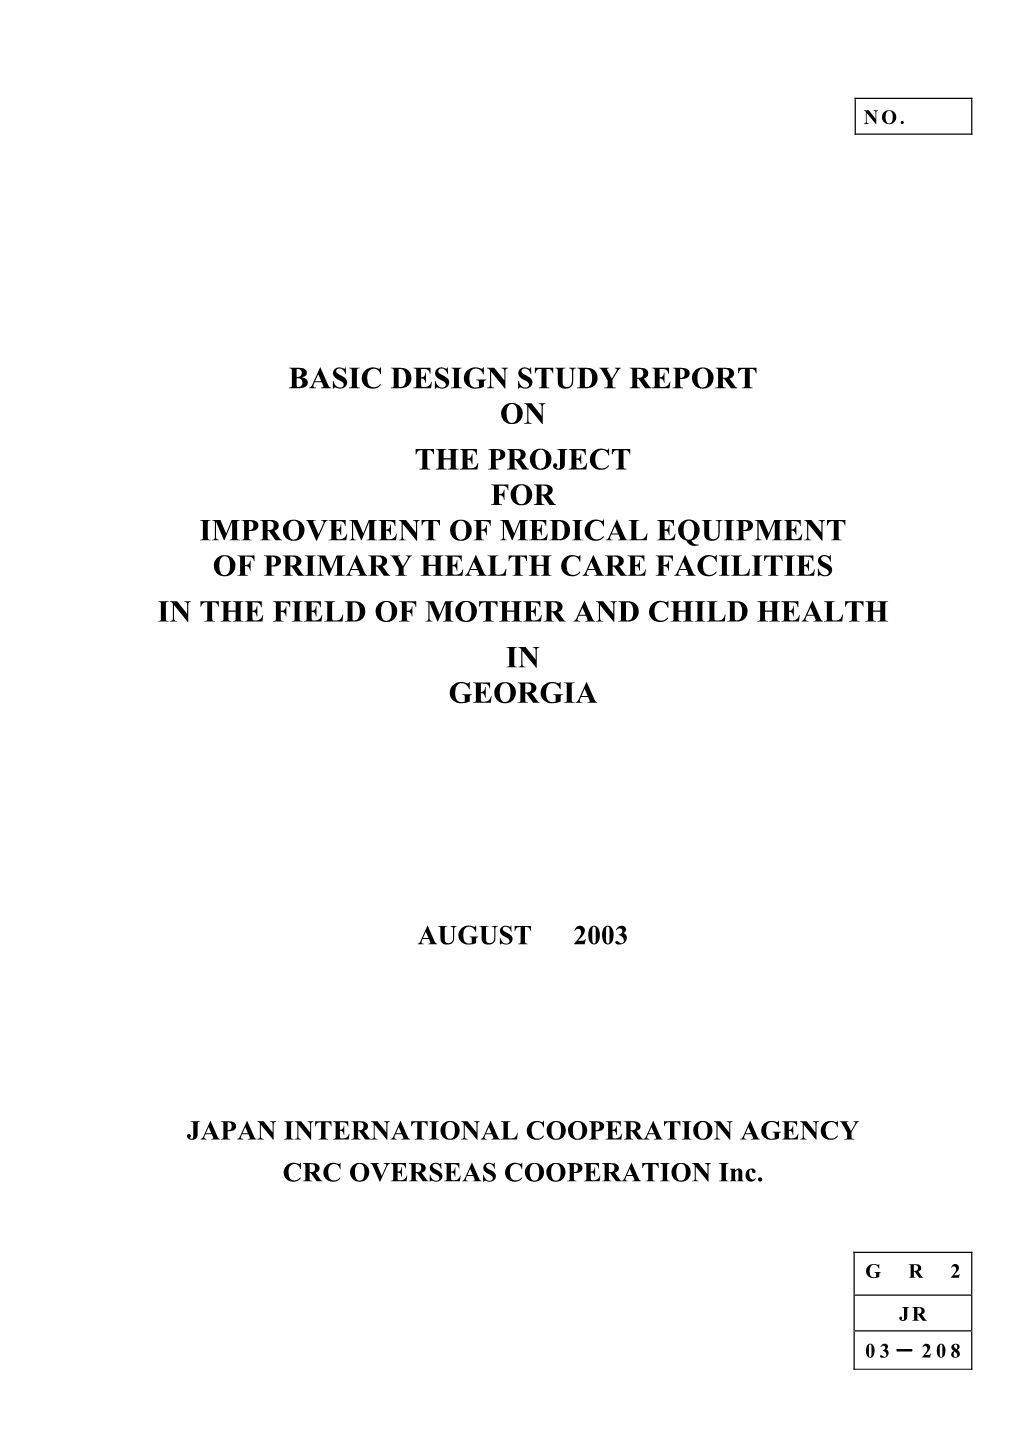 Basic Design Study Report on the Project for Improvement of Medical Equipment of Primary Health Care Facilities in the Field of Mother and Child Health in Georgia